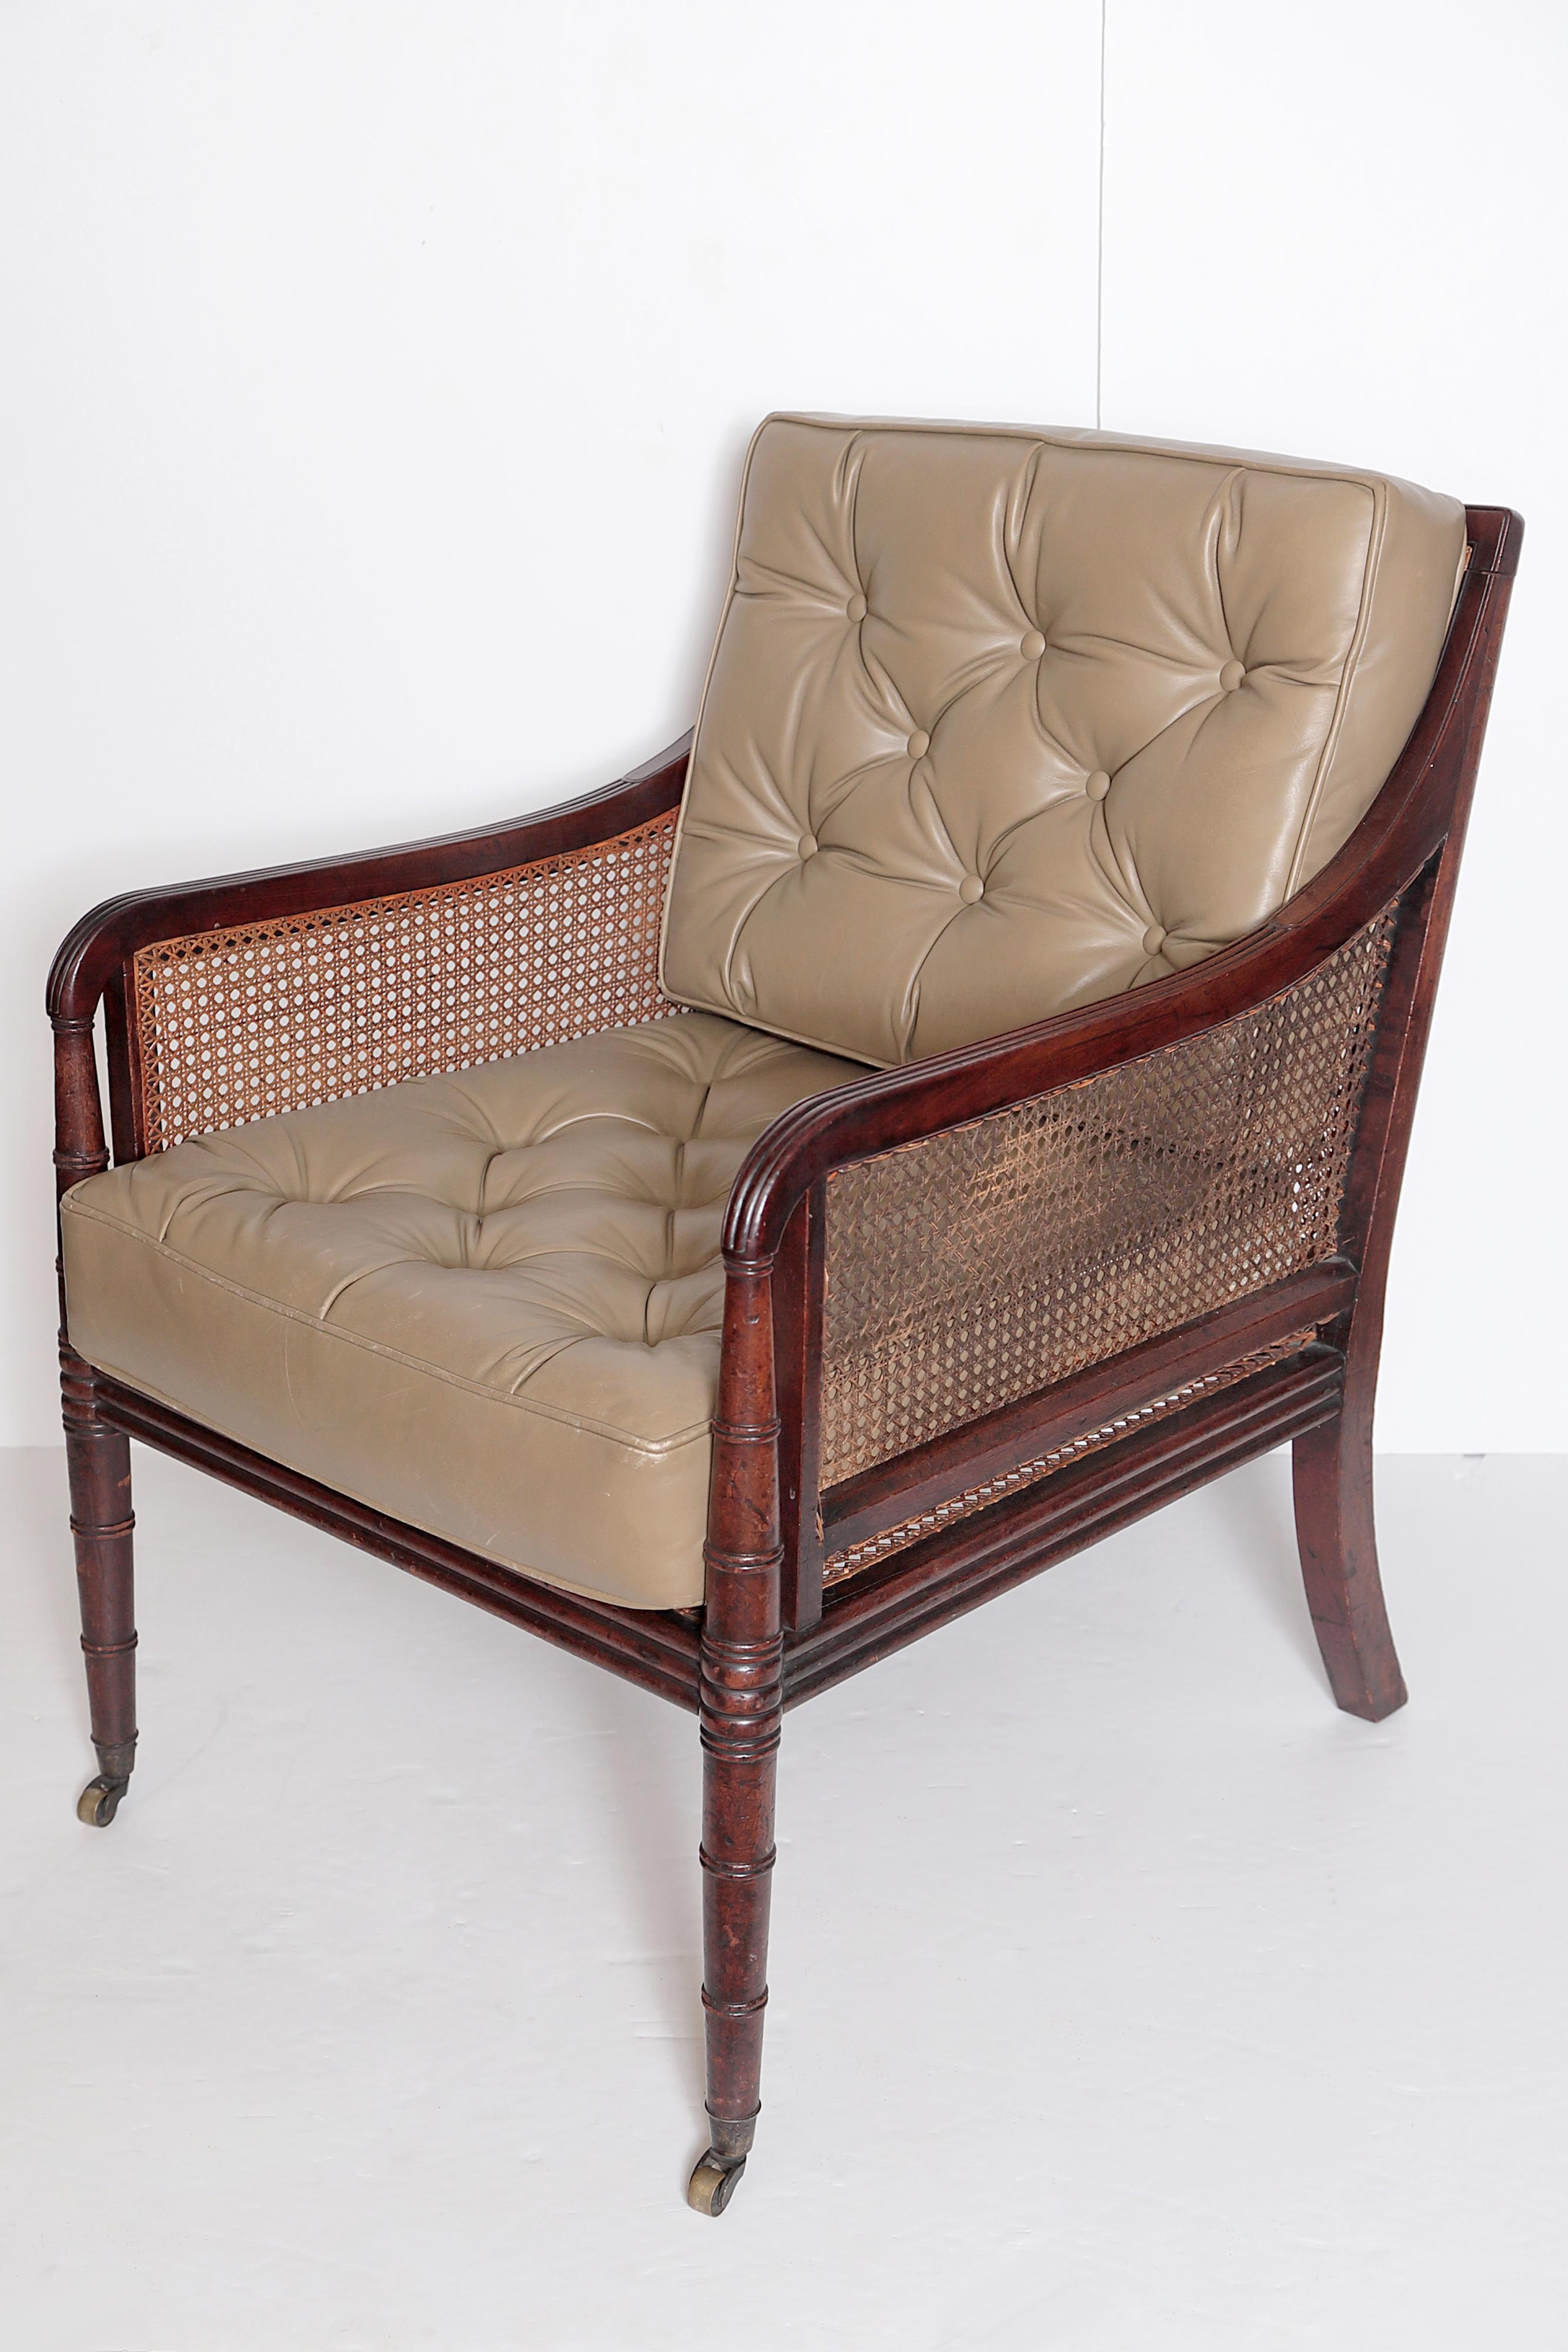 a period English Regency armchair with mahogany faux bamboo frame, caned seat, sides, and back, with olive green leather button-tufted cushions, brass castors on front legs, England, circa 1820

Measures: height of arms 26